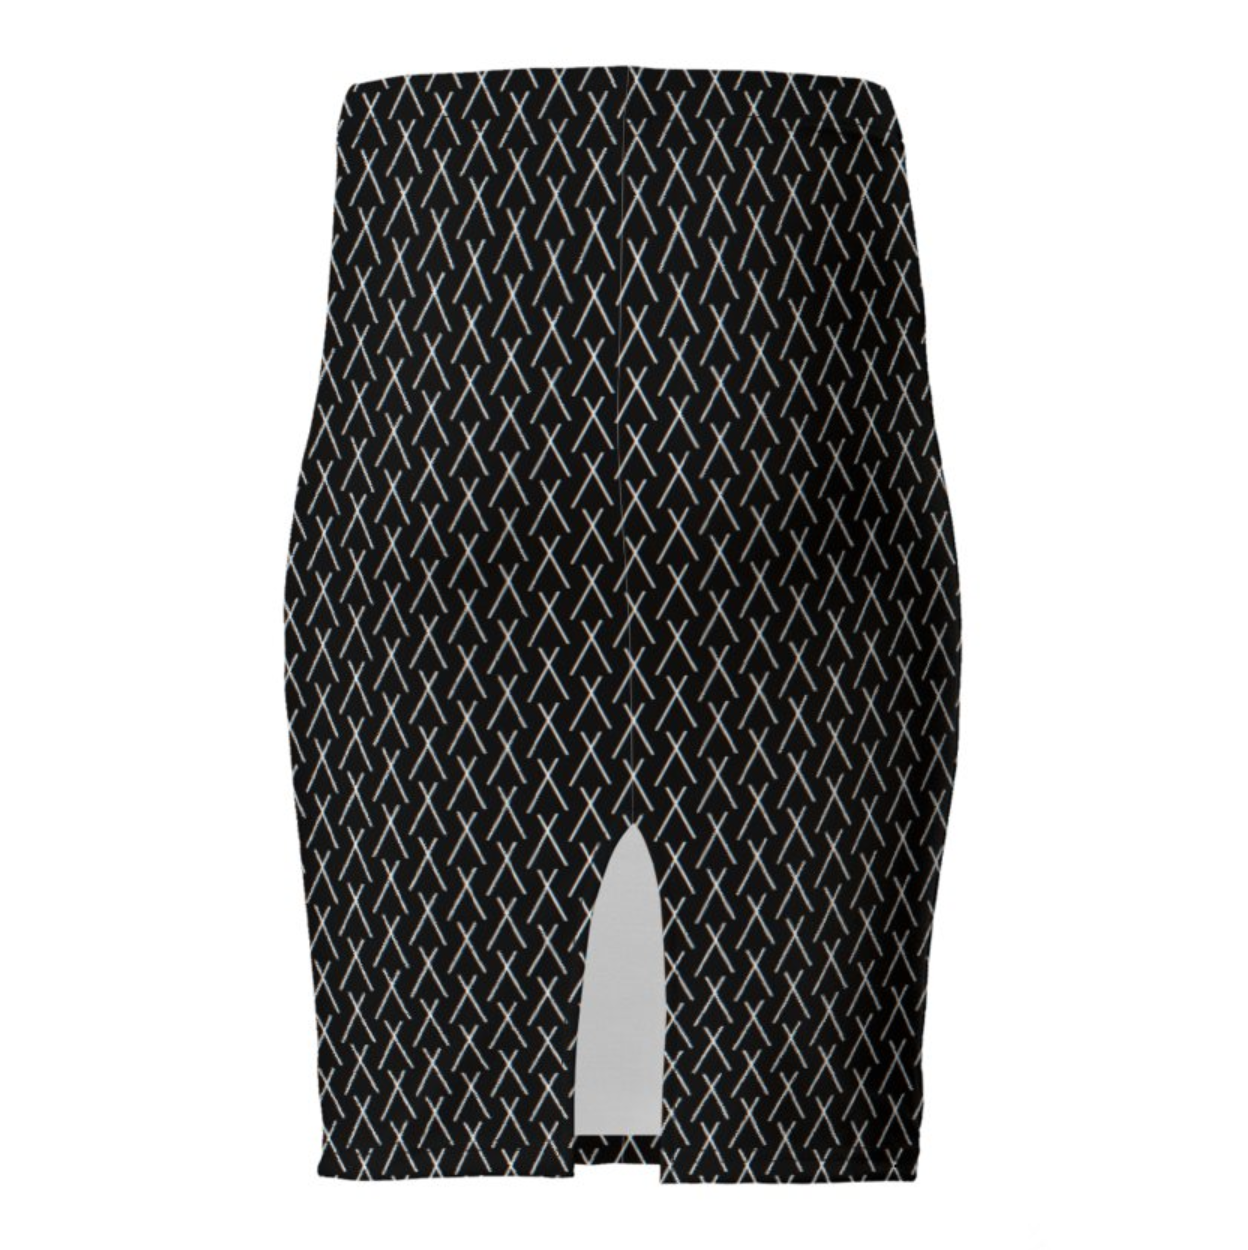 The OFFiCiAL Pencil Skirt